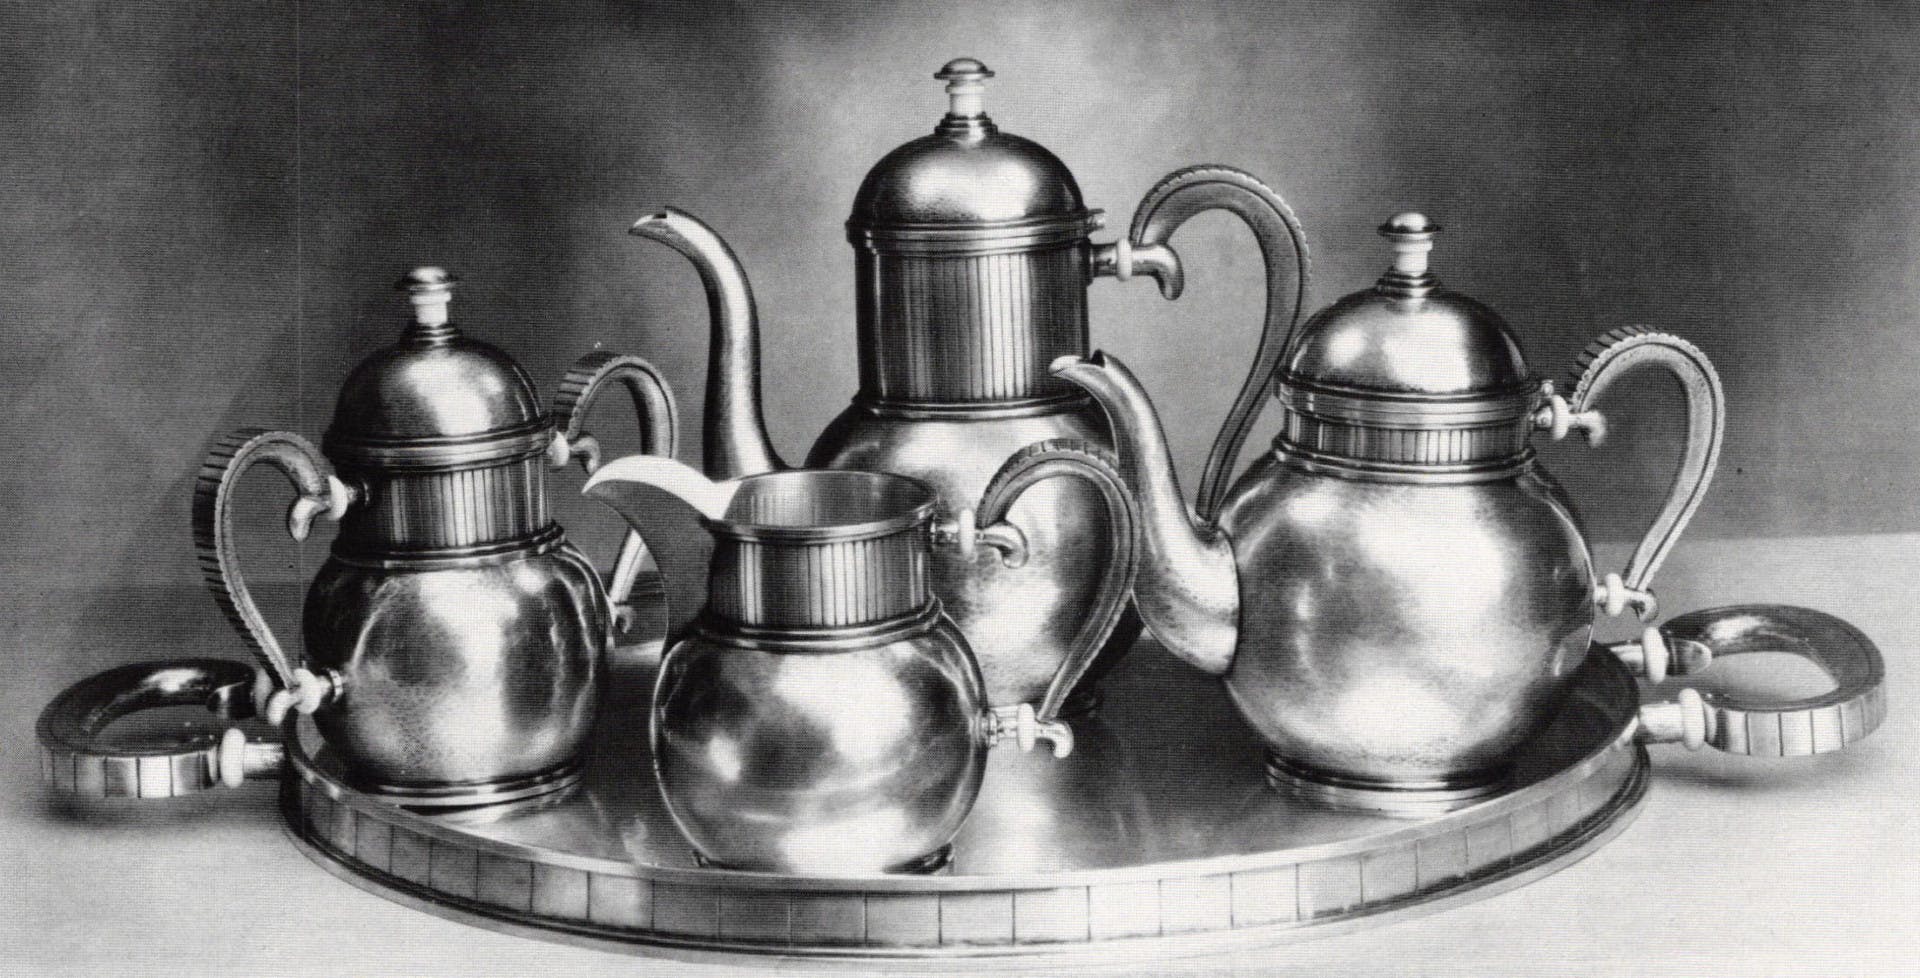 Tea and Coffee Service - Gorham Masterpieces in Metal